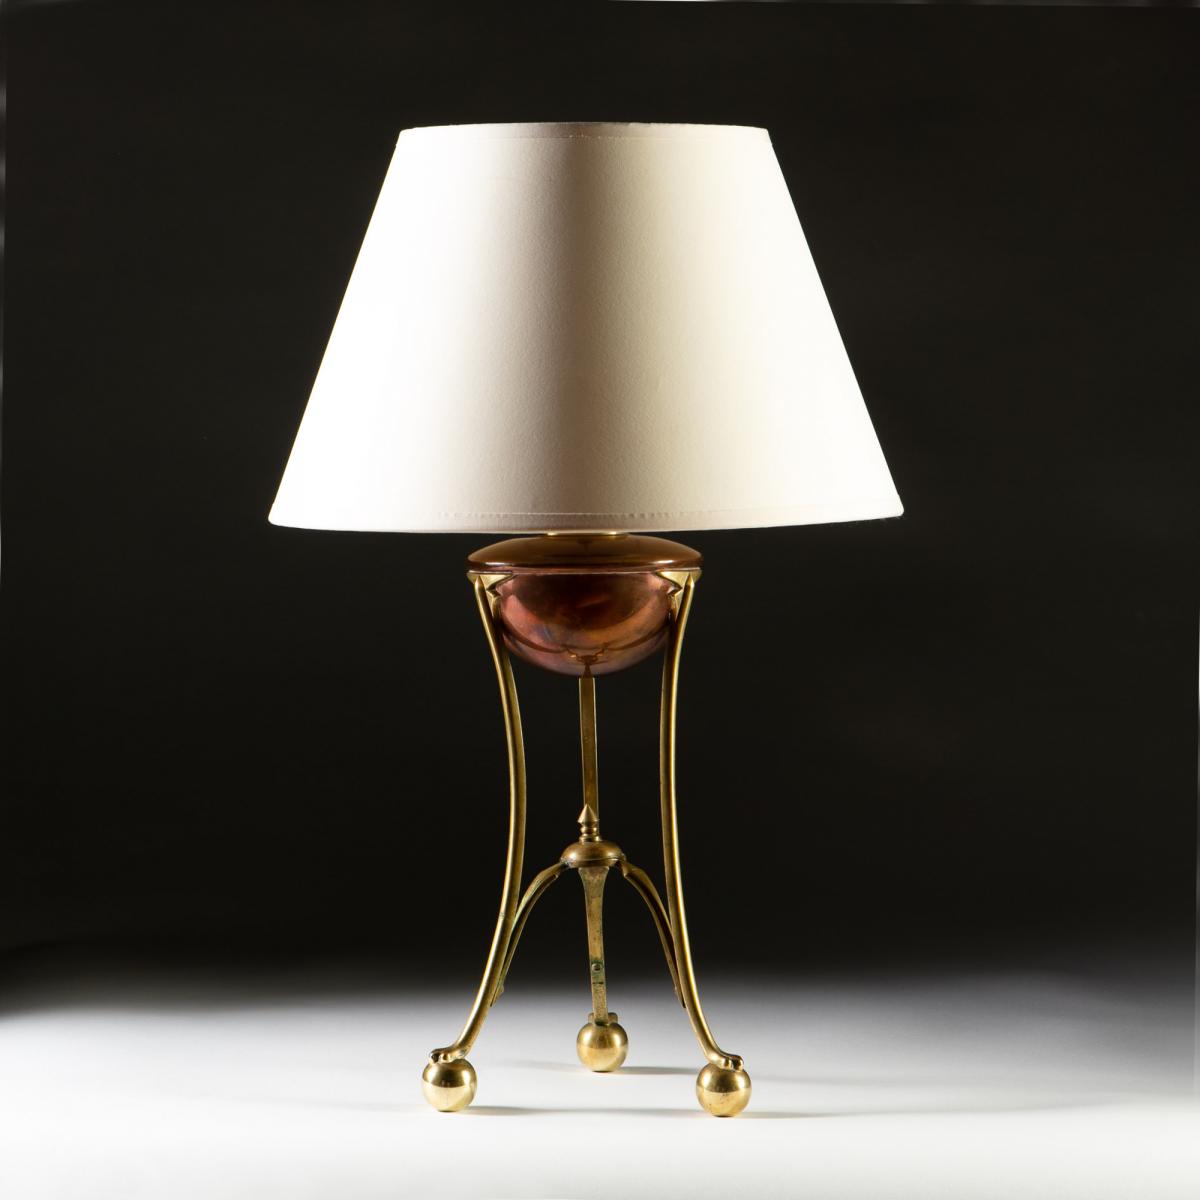 A Brass and Copper Lamp by W.A.S Benson